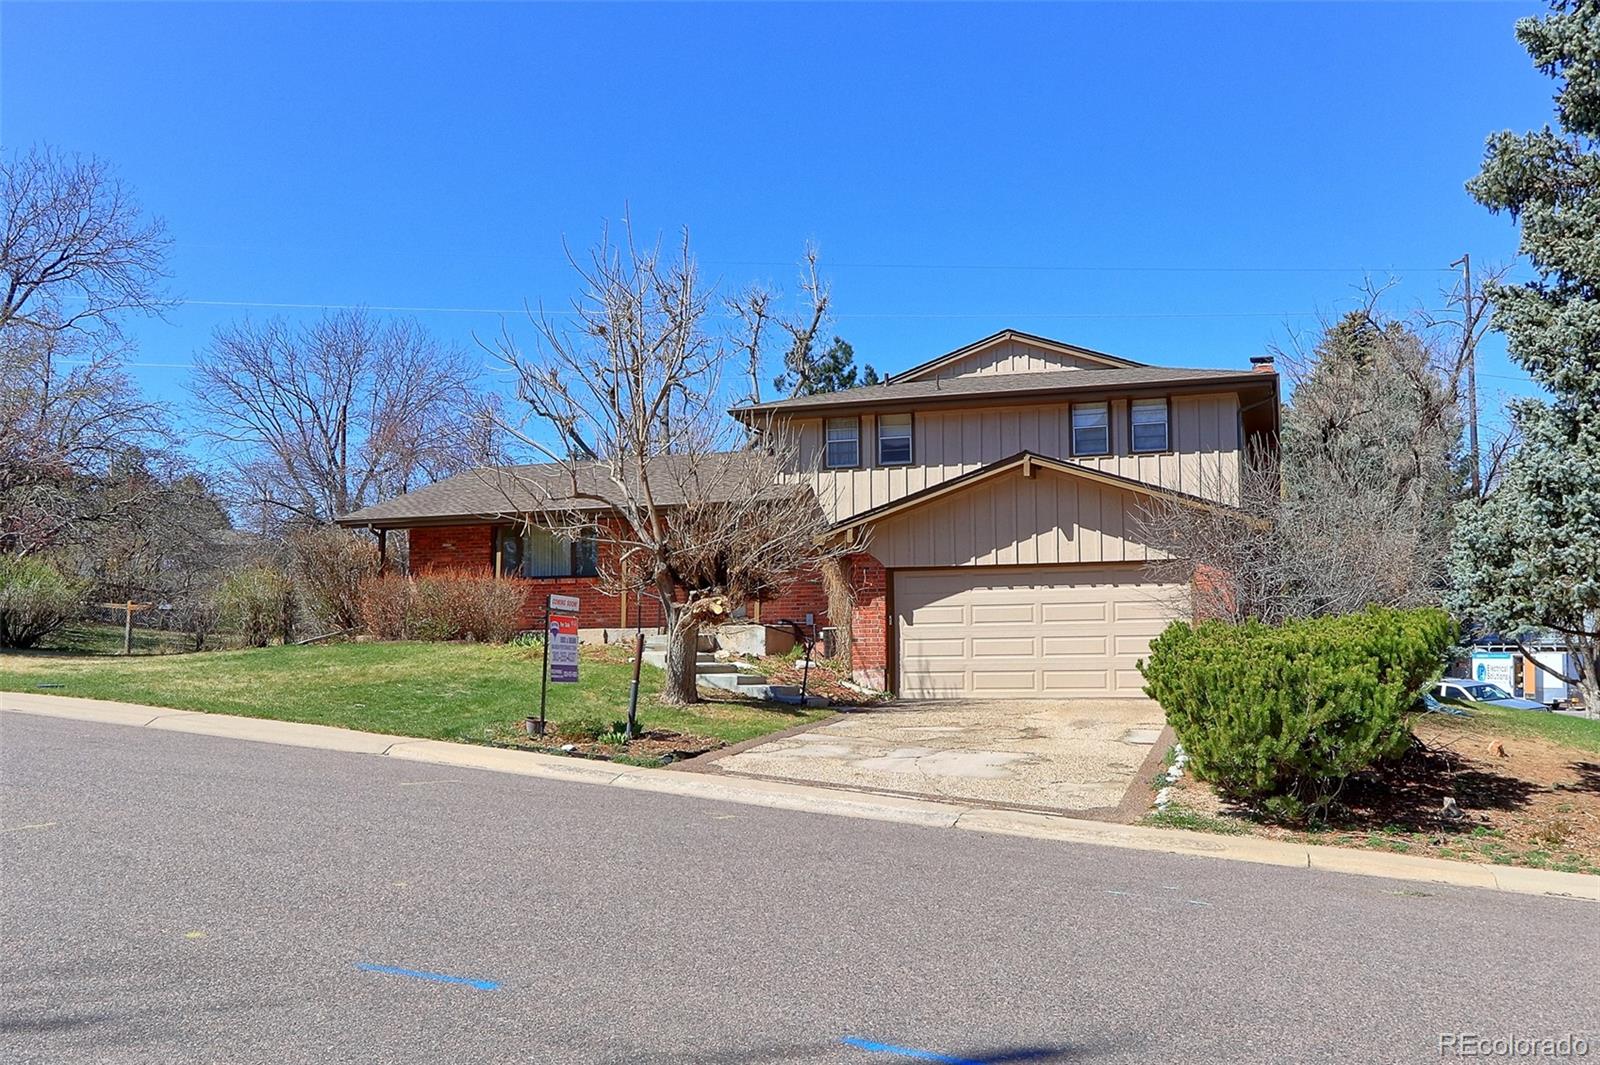 Report Image for 6151 S Rosewood Drive,Littleton, Colorado